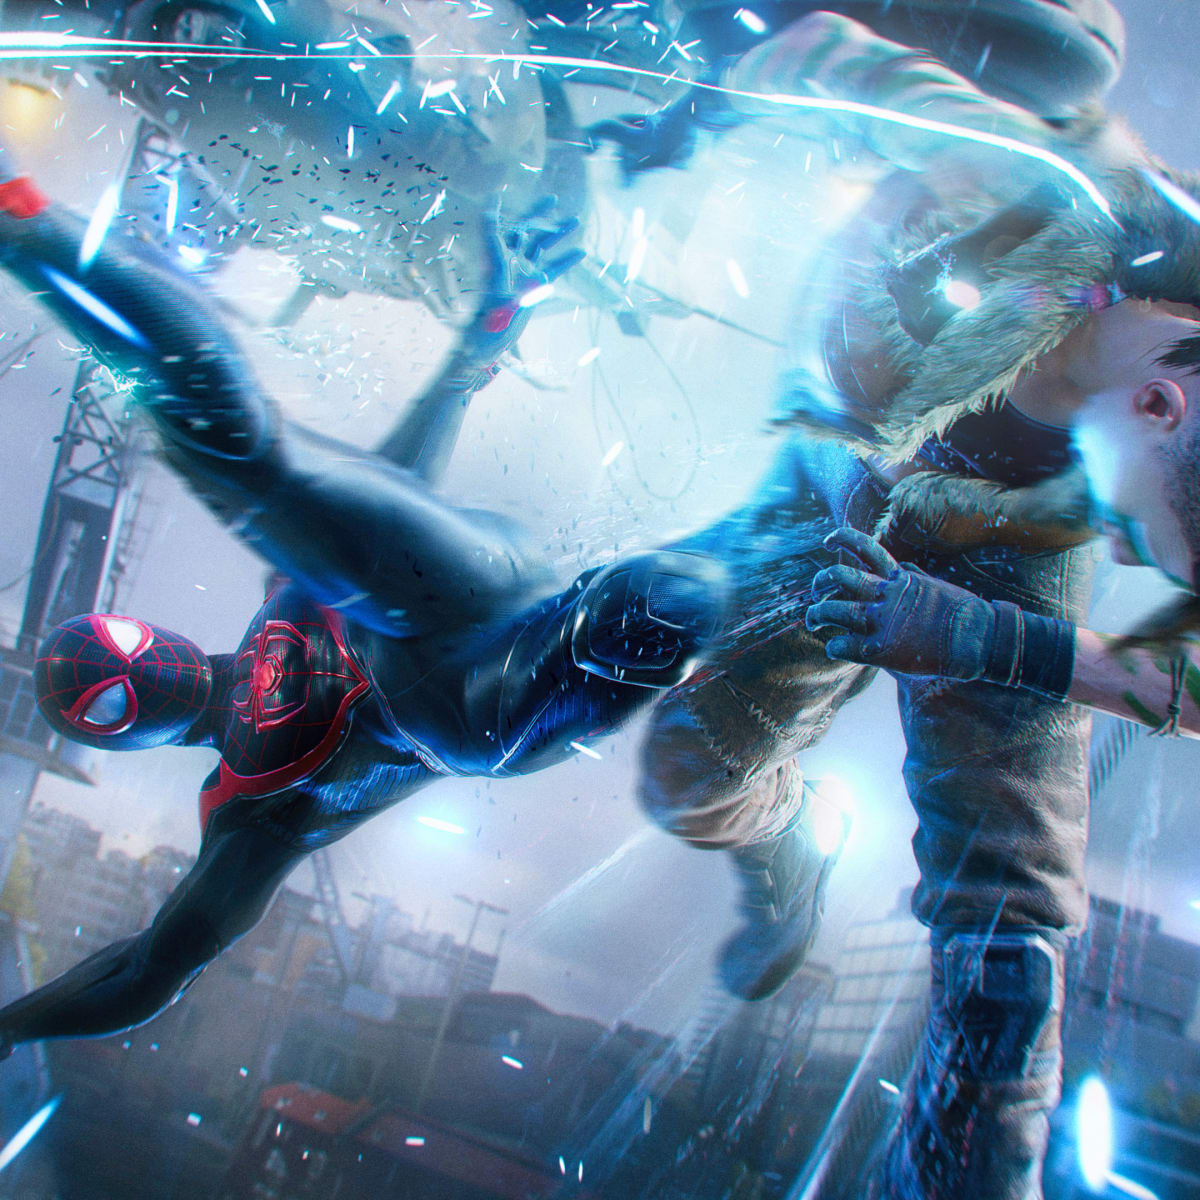 Spider-Man 2 is out on PS5 today and the devs are already open to a Venom  spinoff